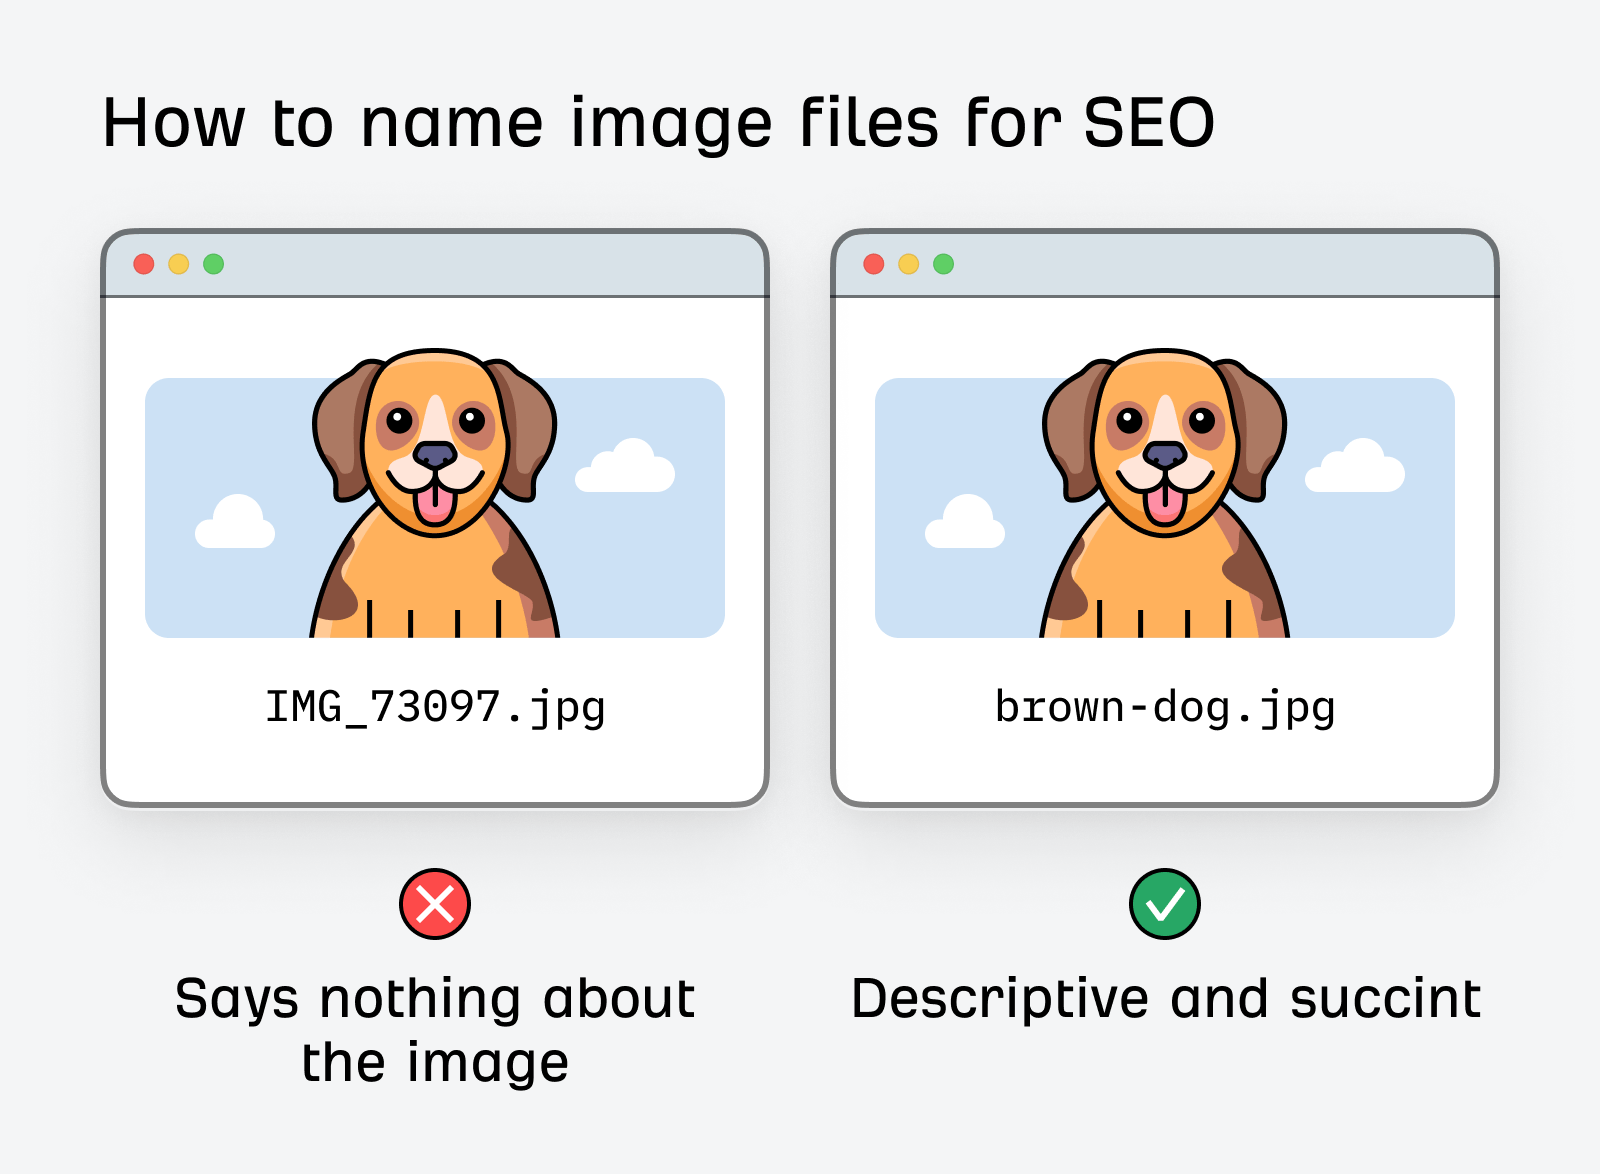 How to name image files for SEO